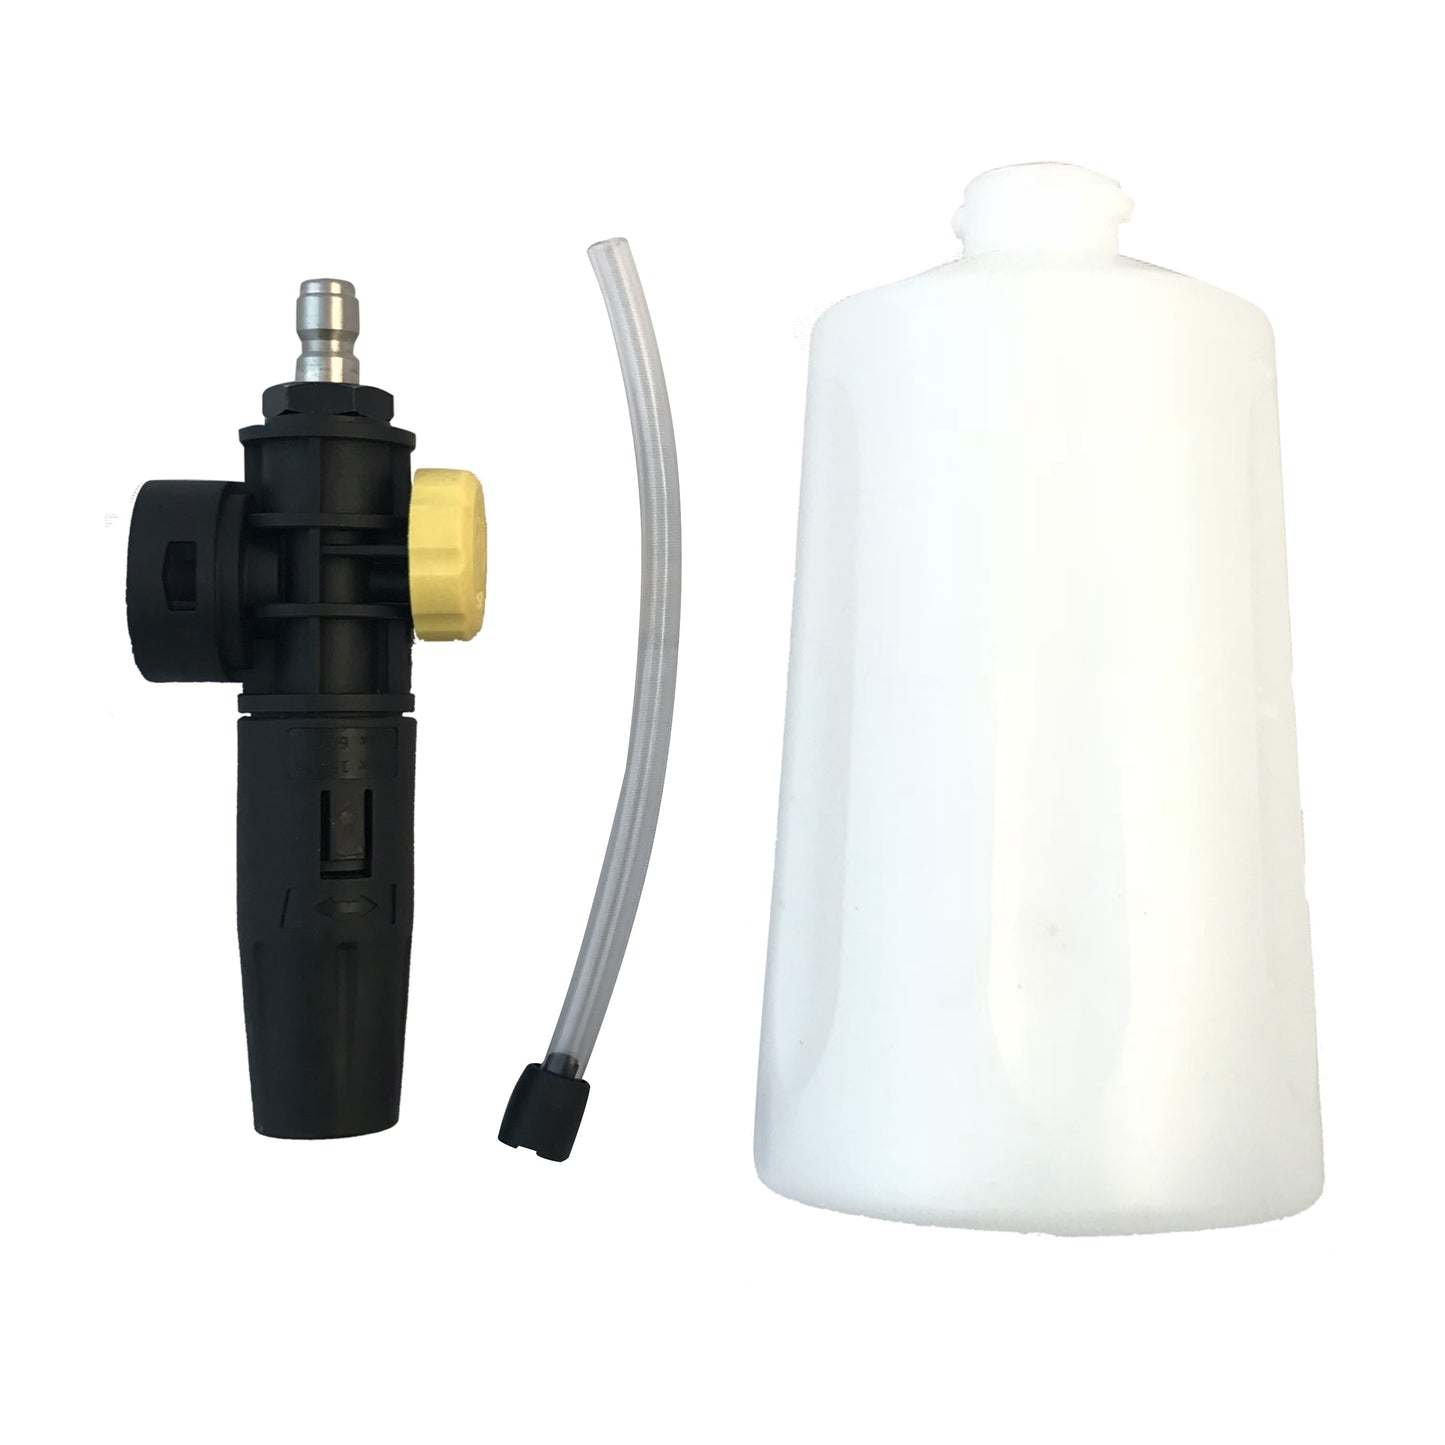 Pressure Washer Kit for Domestic Machines with 25 Foot 3000 PSI Hose, Trigger Gun, Extension Lance and Snow Foam Bottle